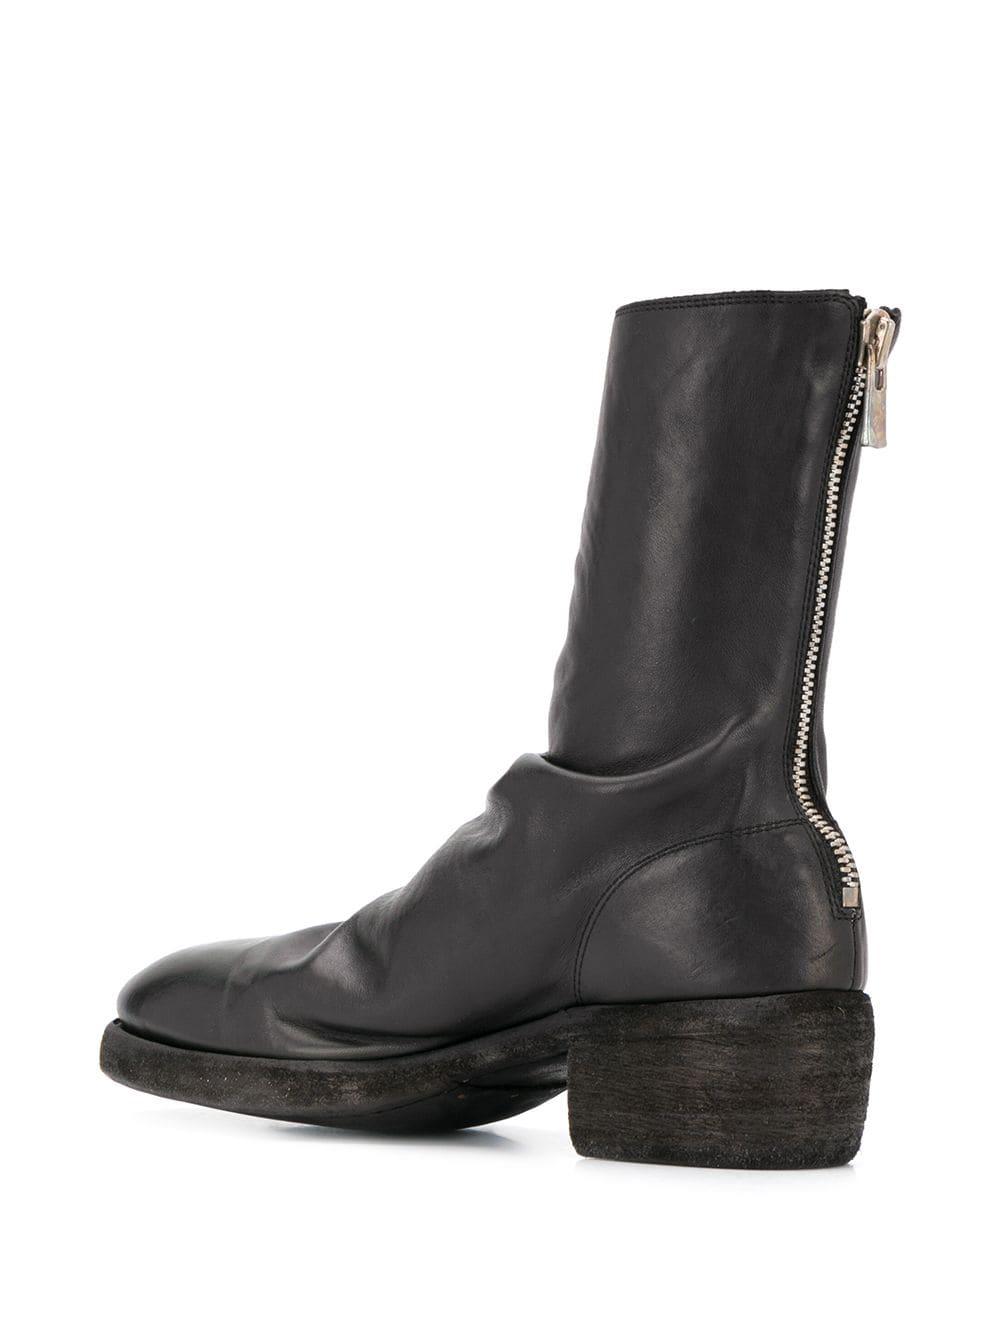 Guidi 788z Leather Boots in Black - Lyst